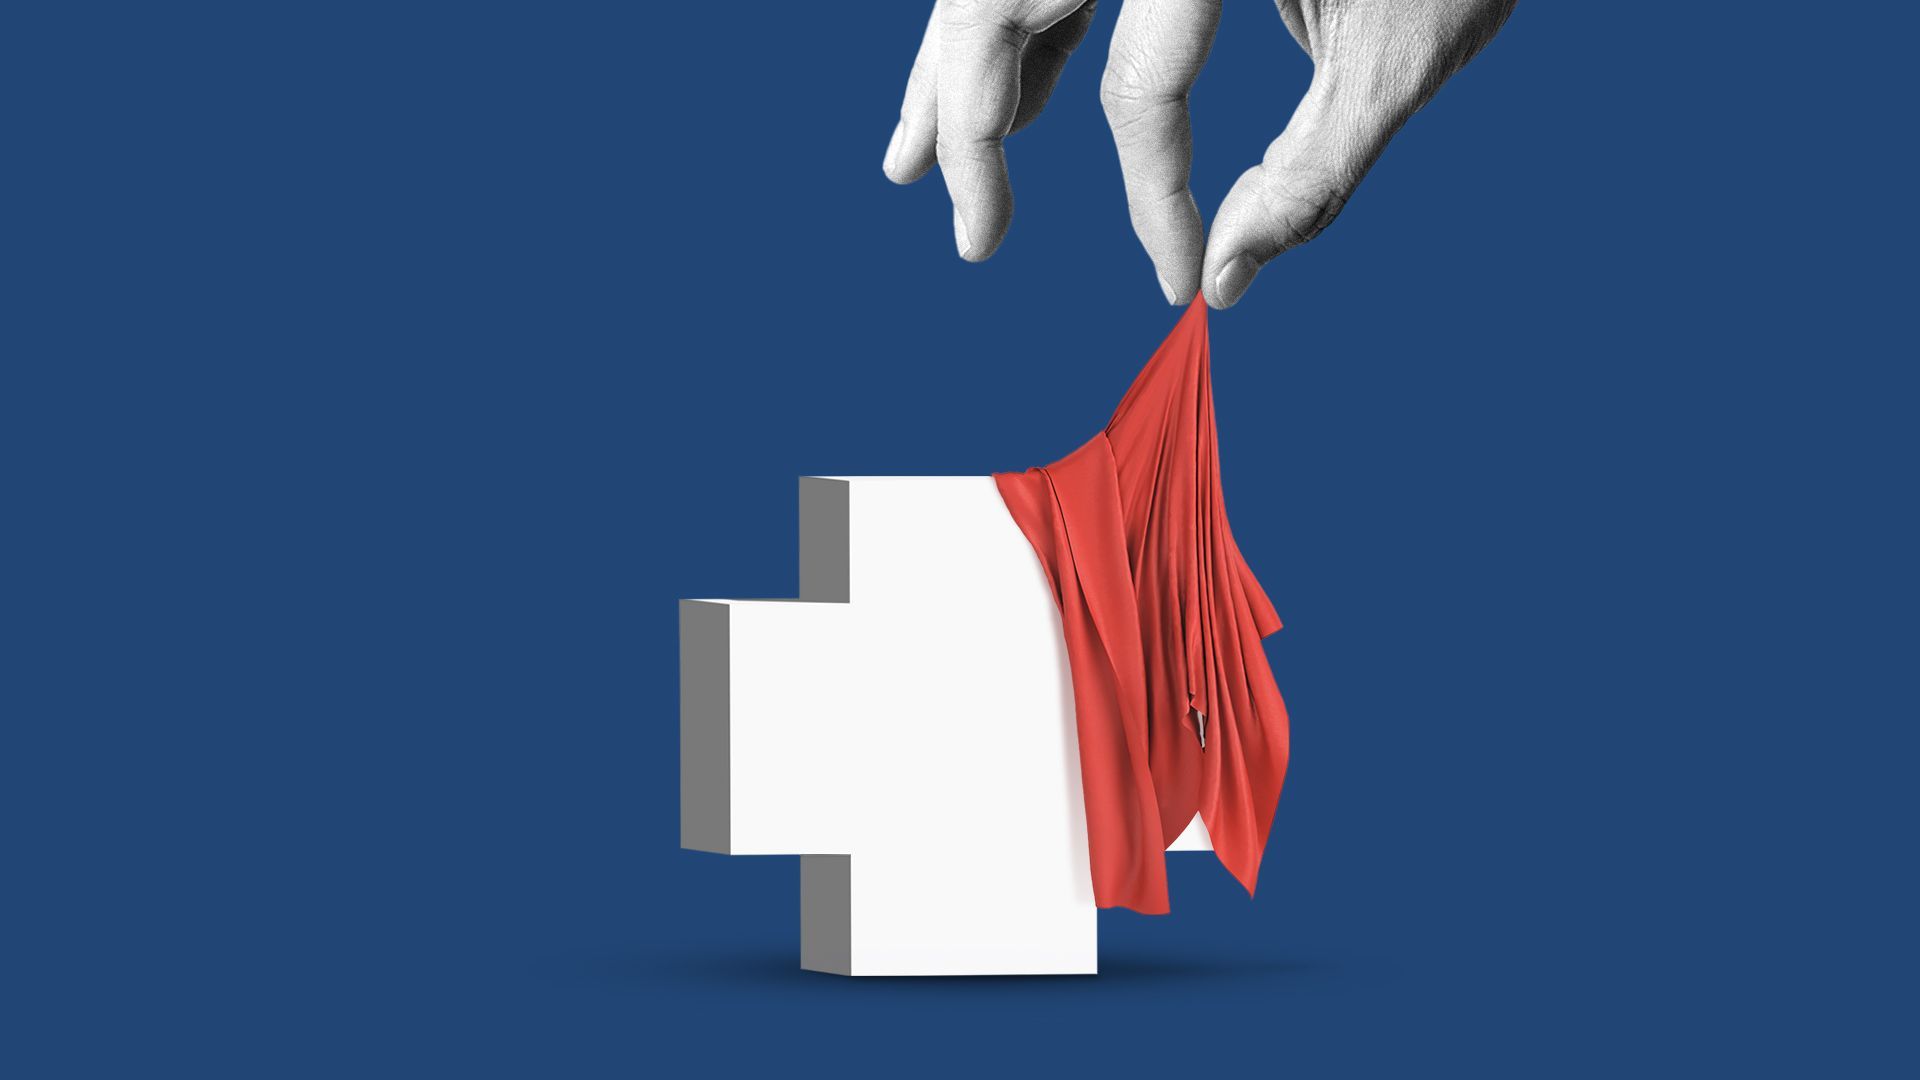 Illustration of a hand pulling back a red piece of fabric to reveal a health plus shape